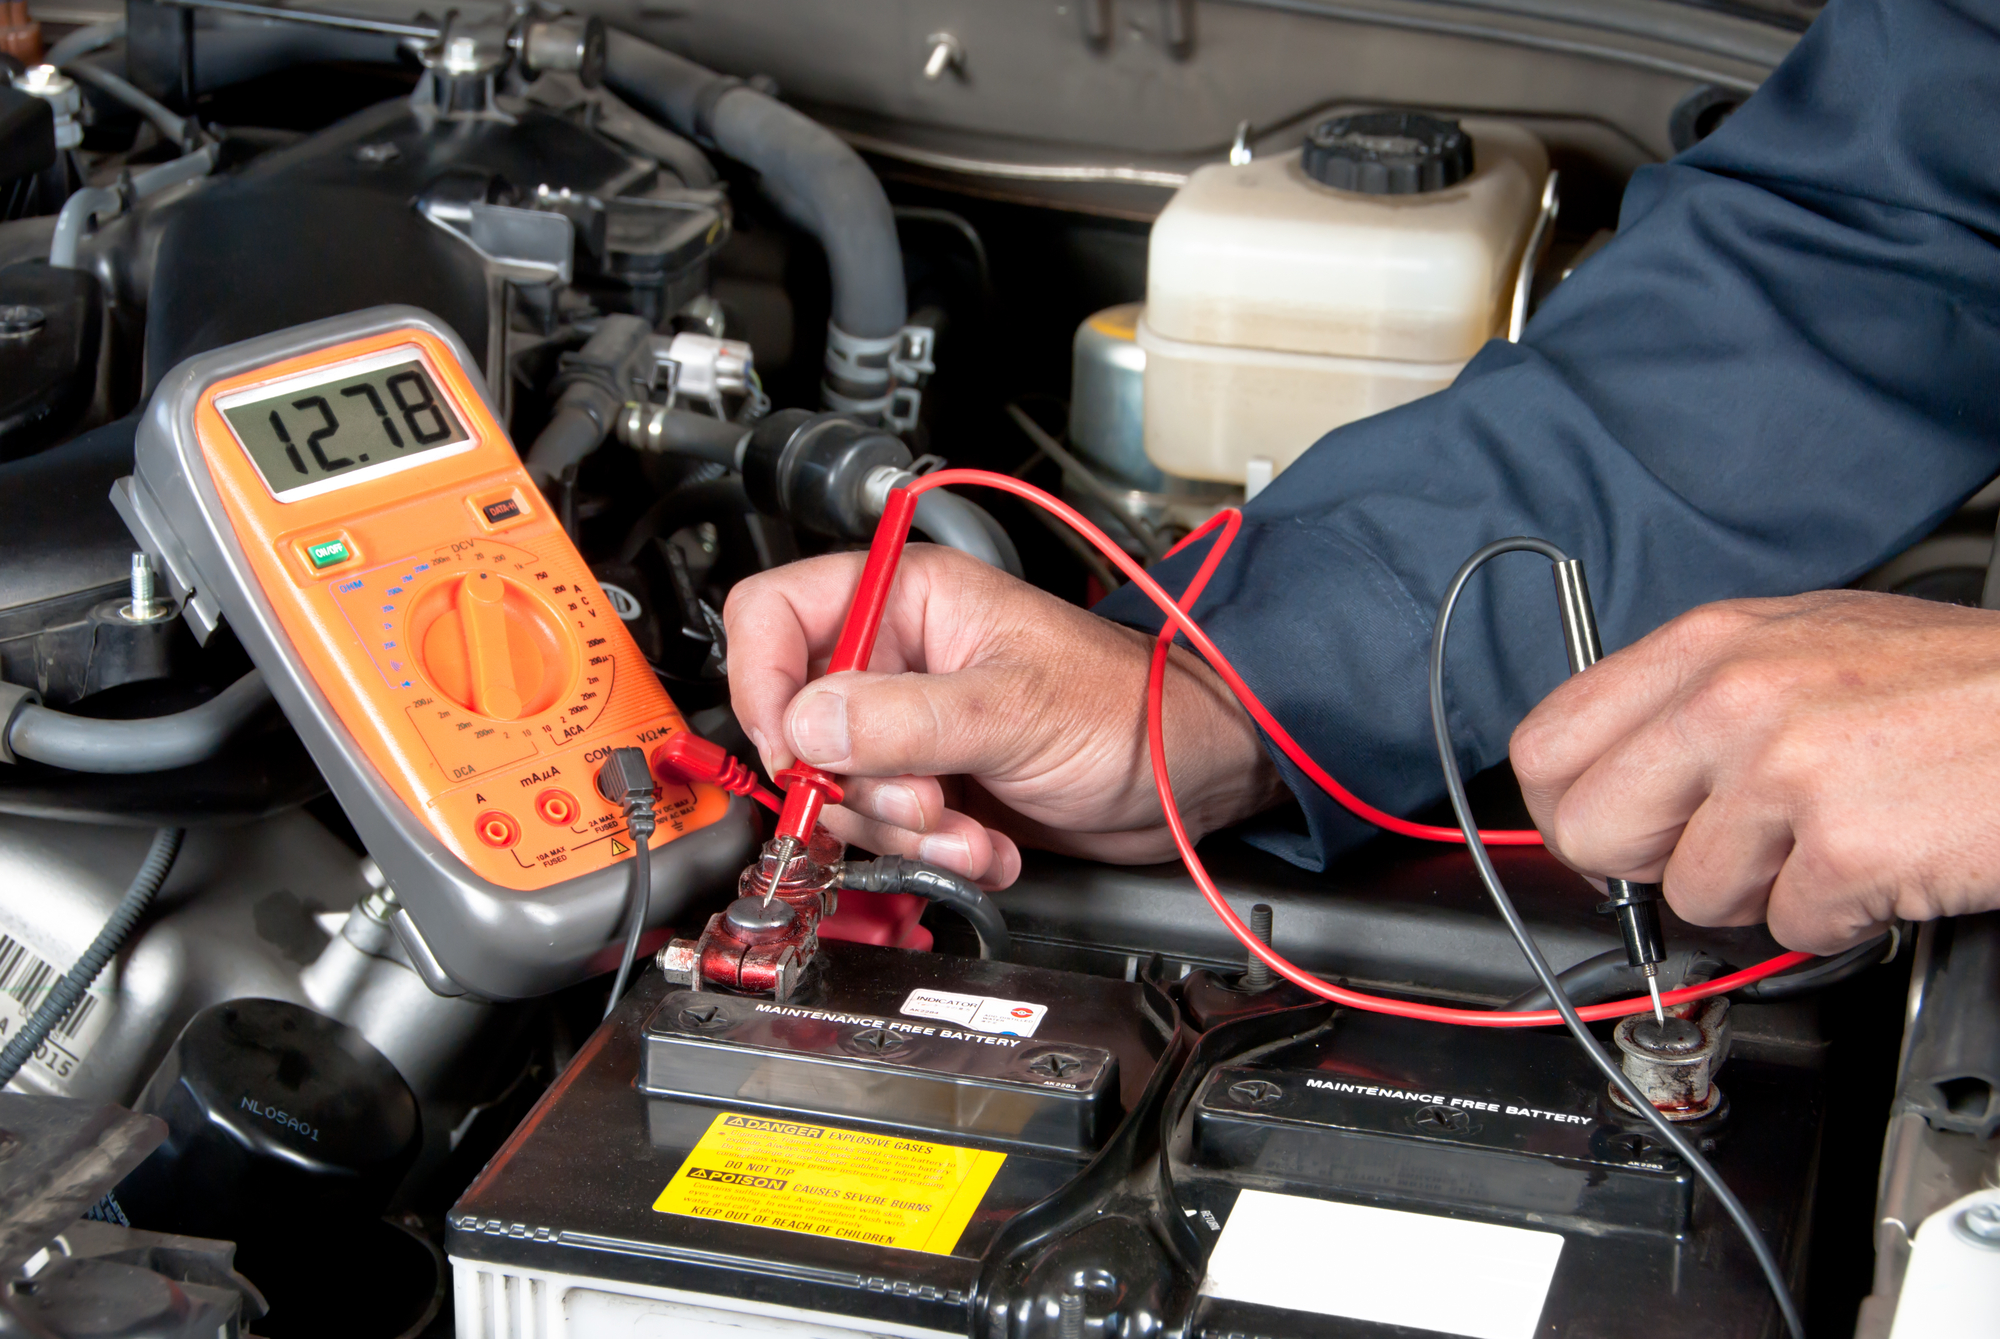 Technician is checking battery voltage with multimeter.